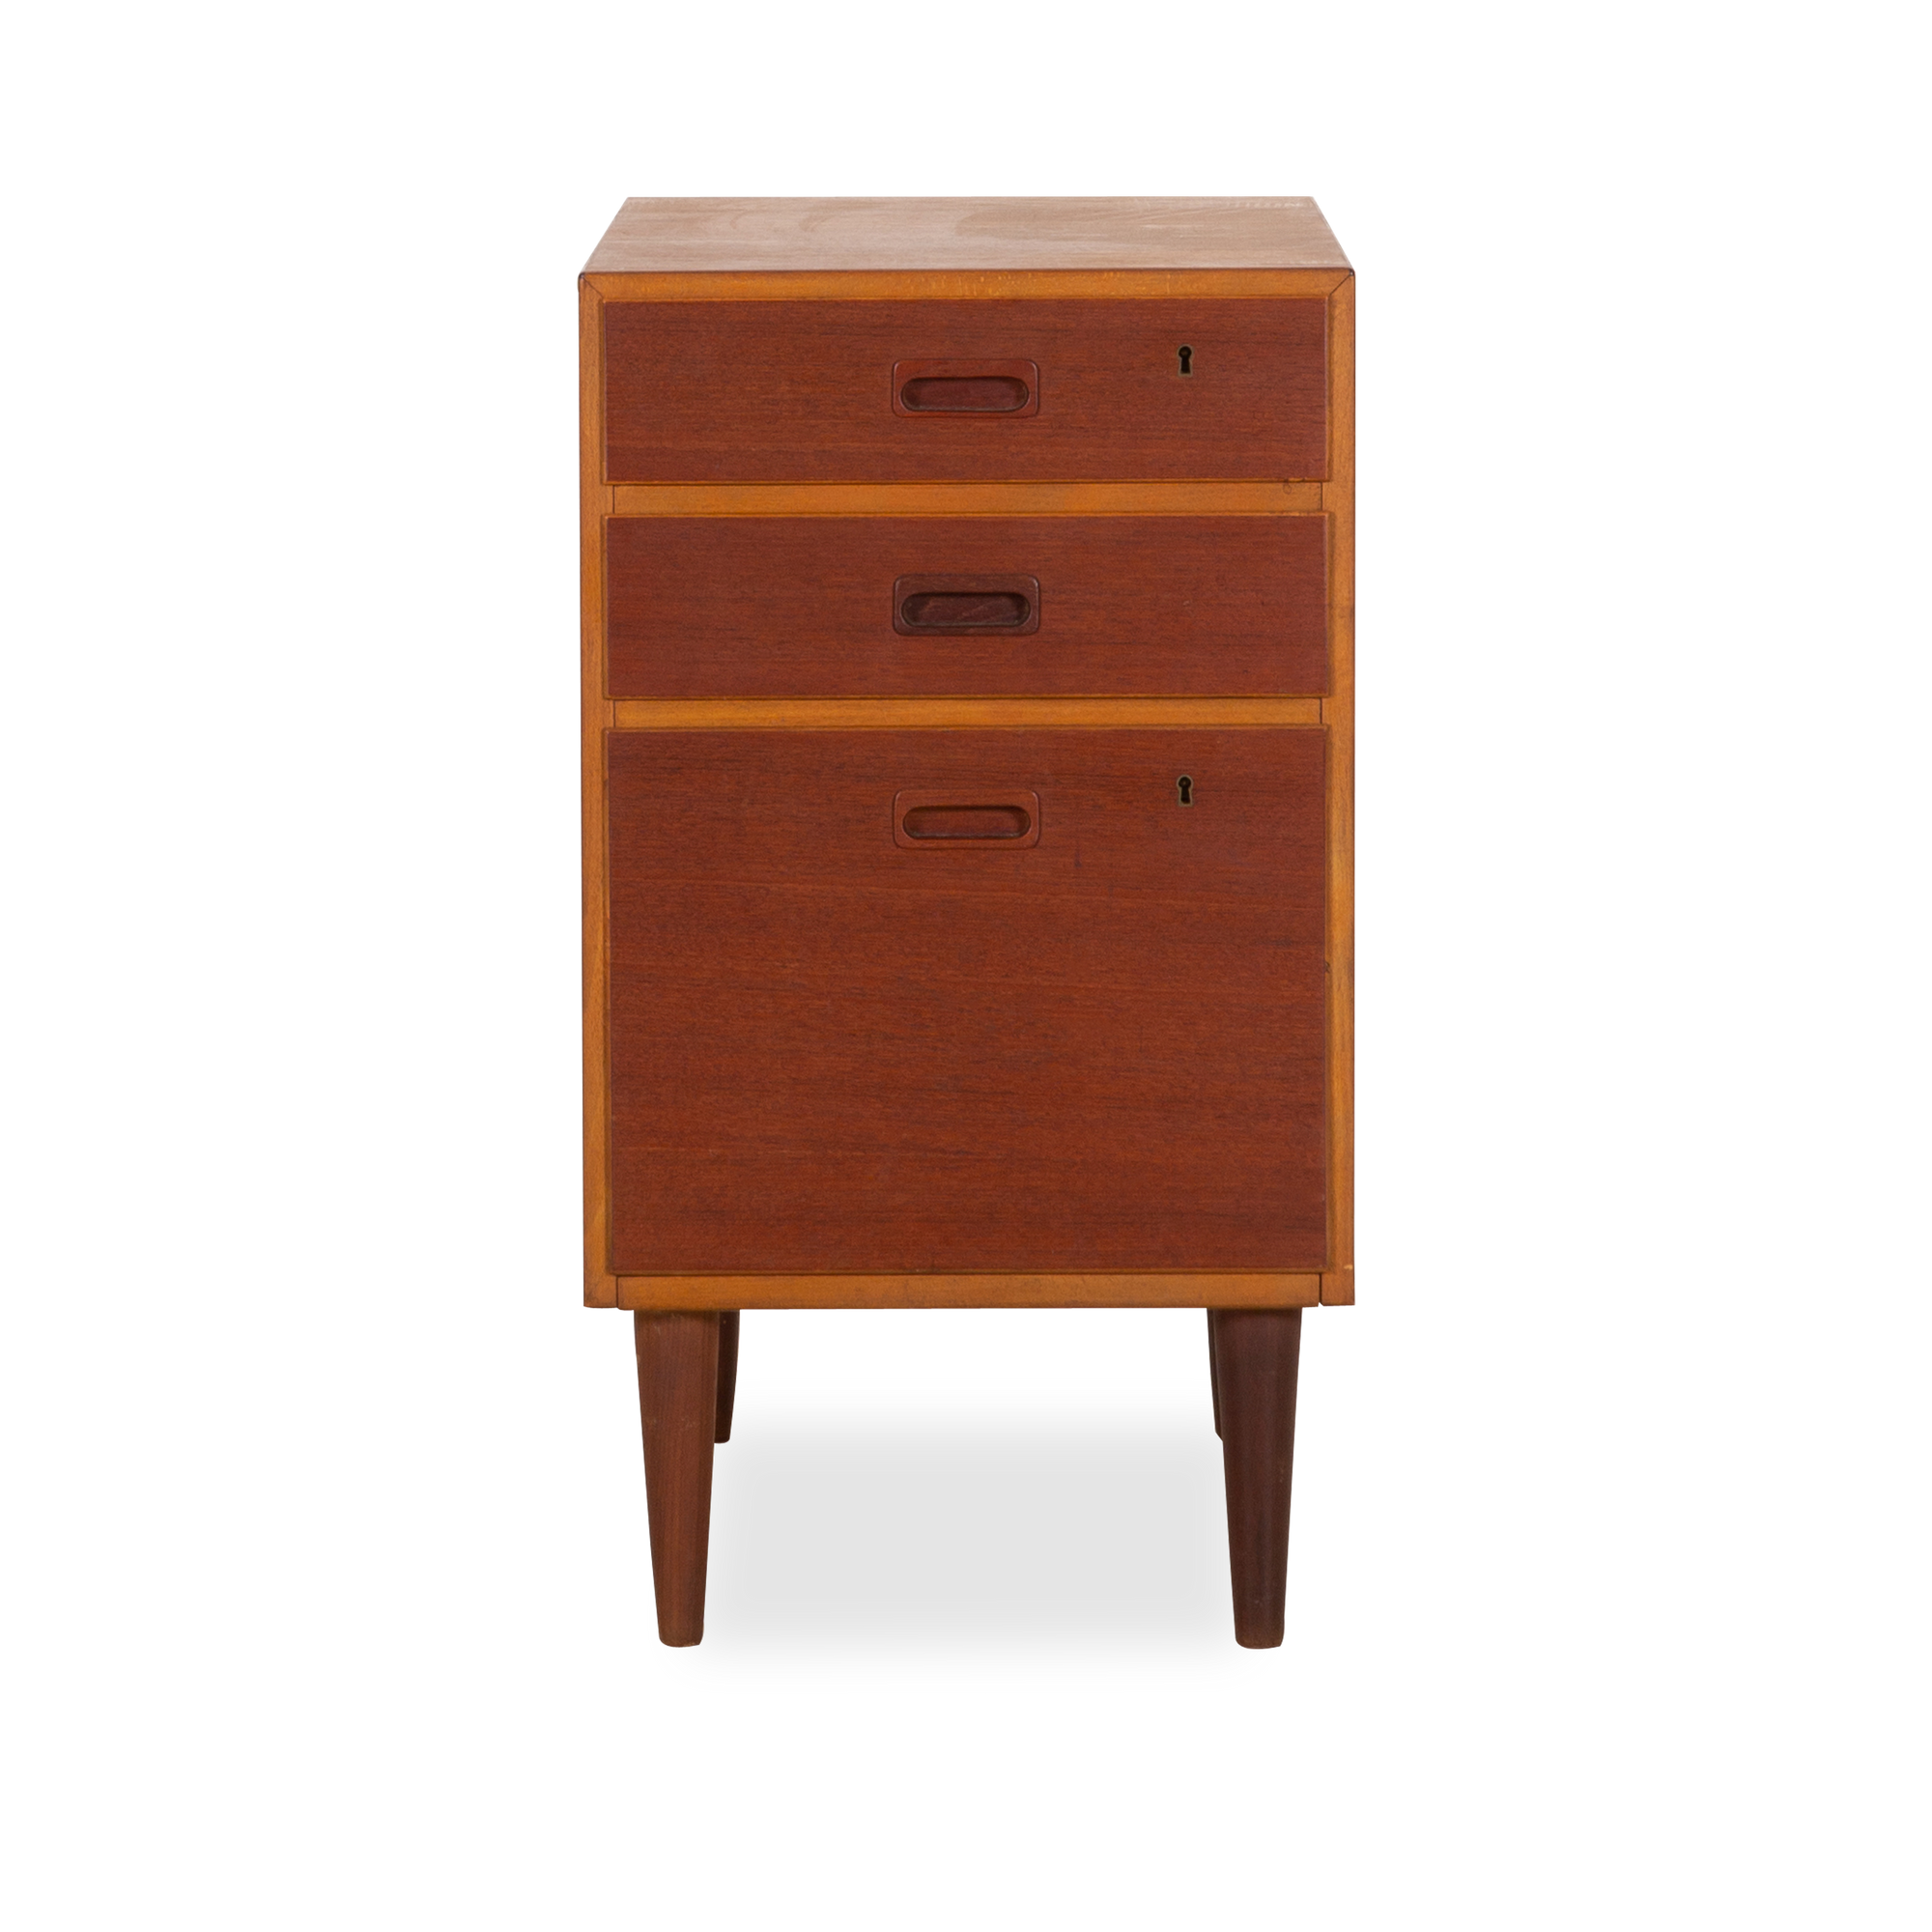 A unique accent piece, this vintage cabinet was produced in Denmark, circa 1950s.